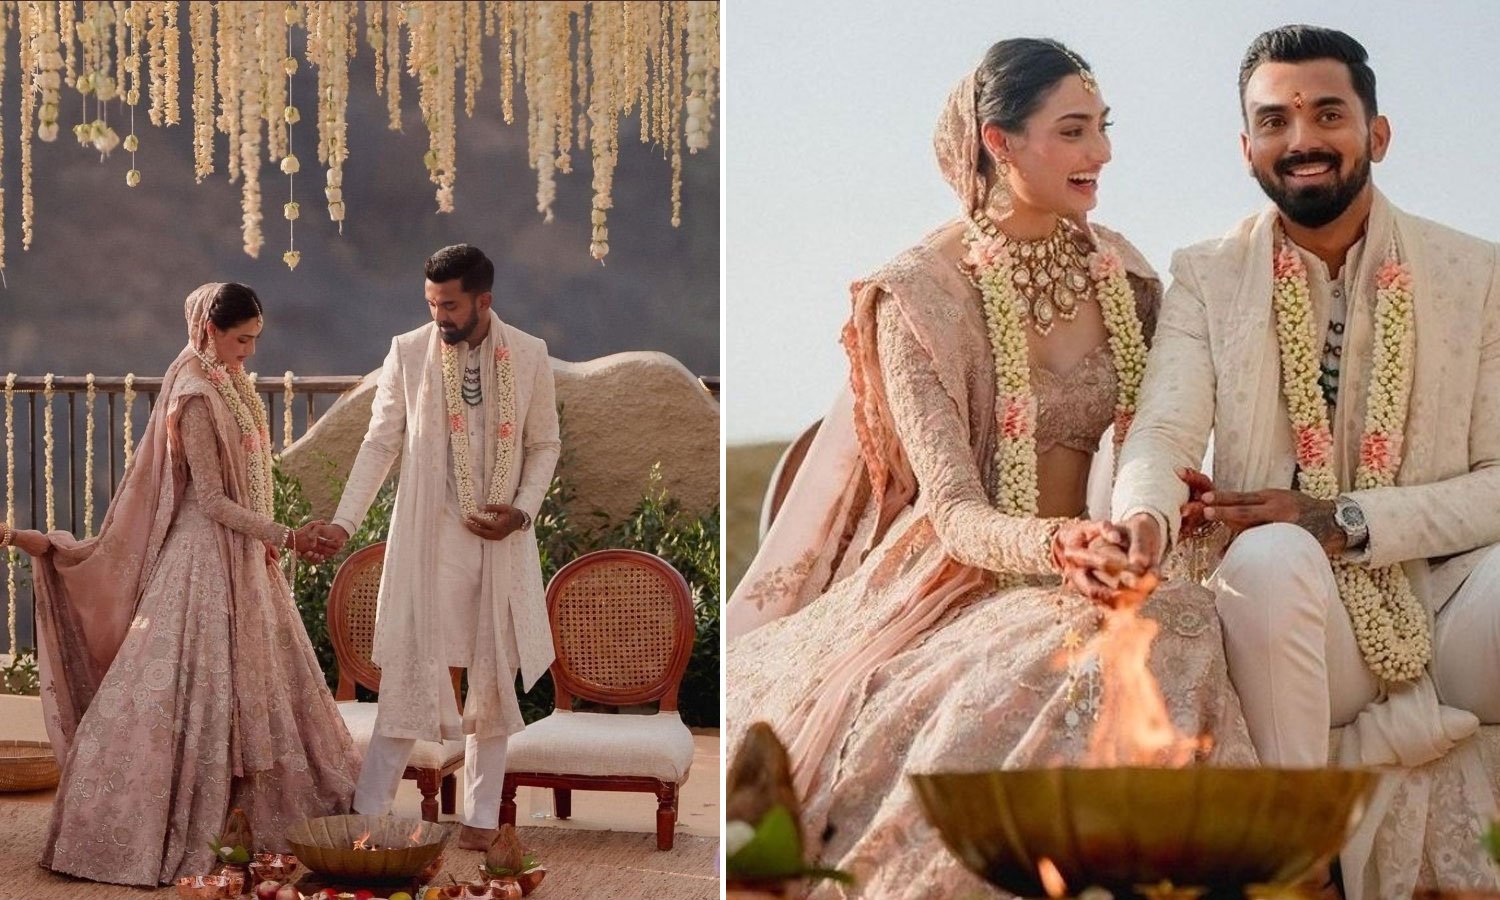 Actress Athiya Shetty and cricketer KL Rahul's wedding pictures have come out